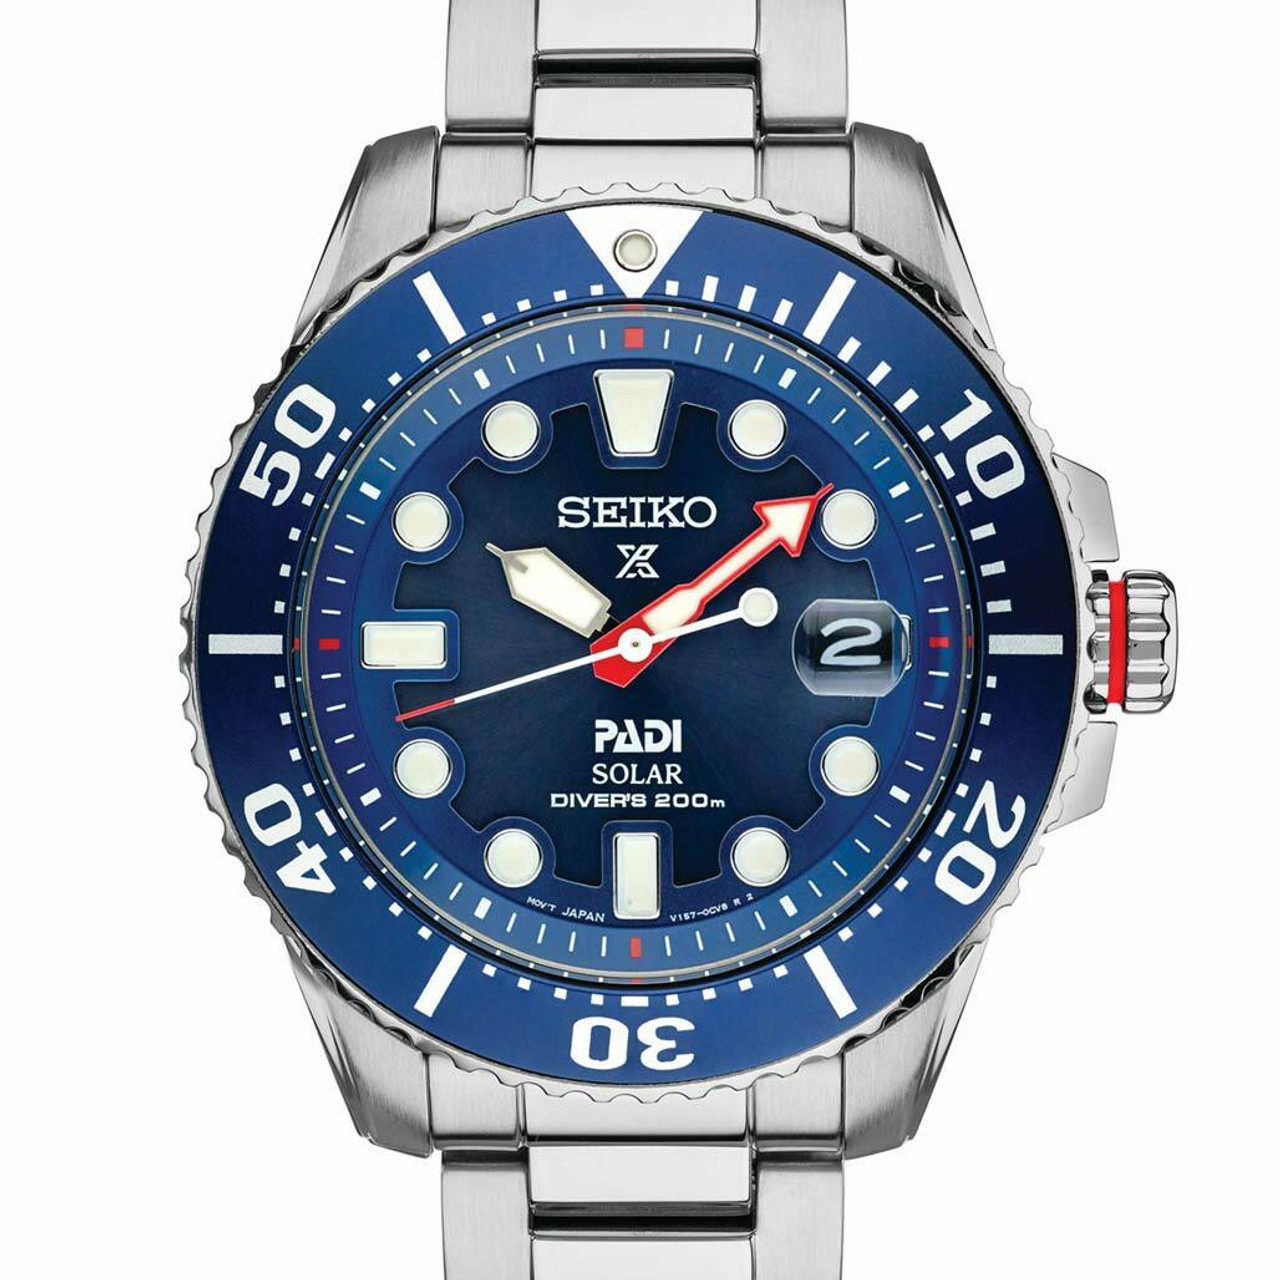 Lilla cabriolet drivende Seiko Special Edition PADI Prospex Solar Dive Watch with Blue Dial and  Stainless Steel Bracelet #SNE549